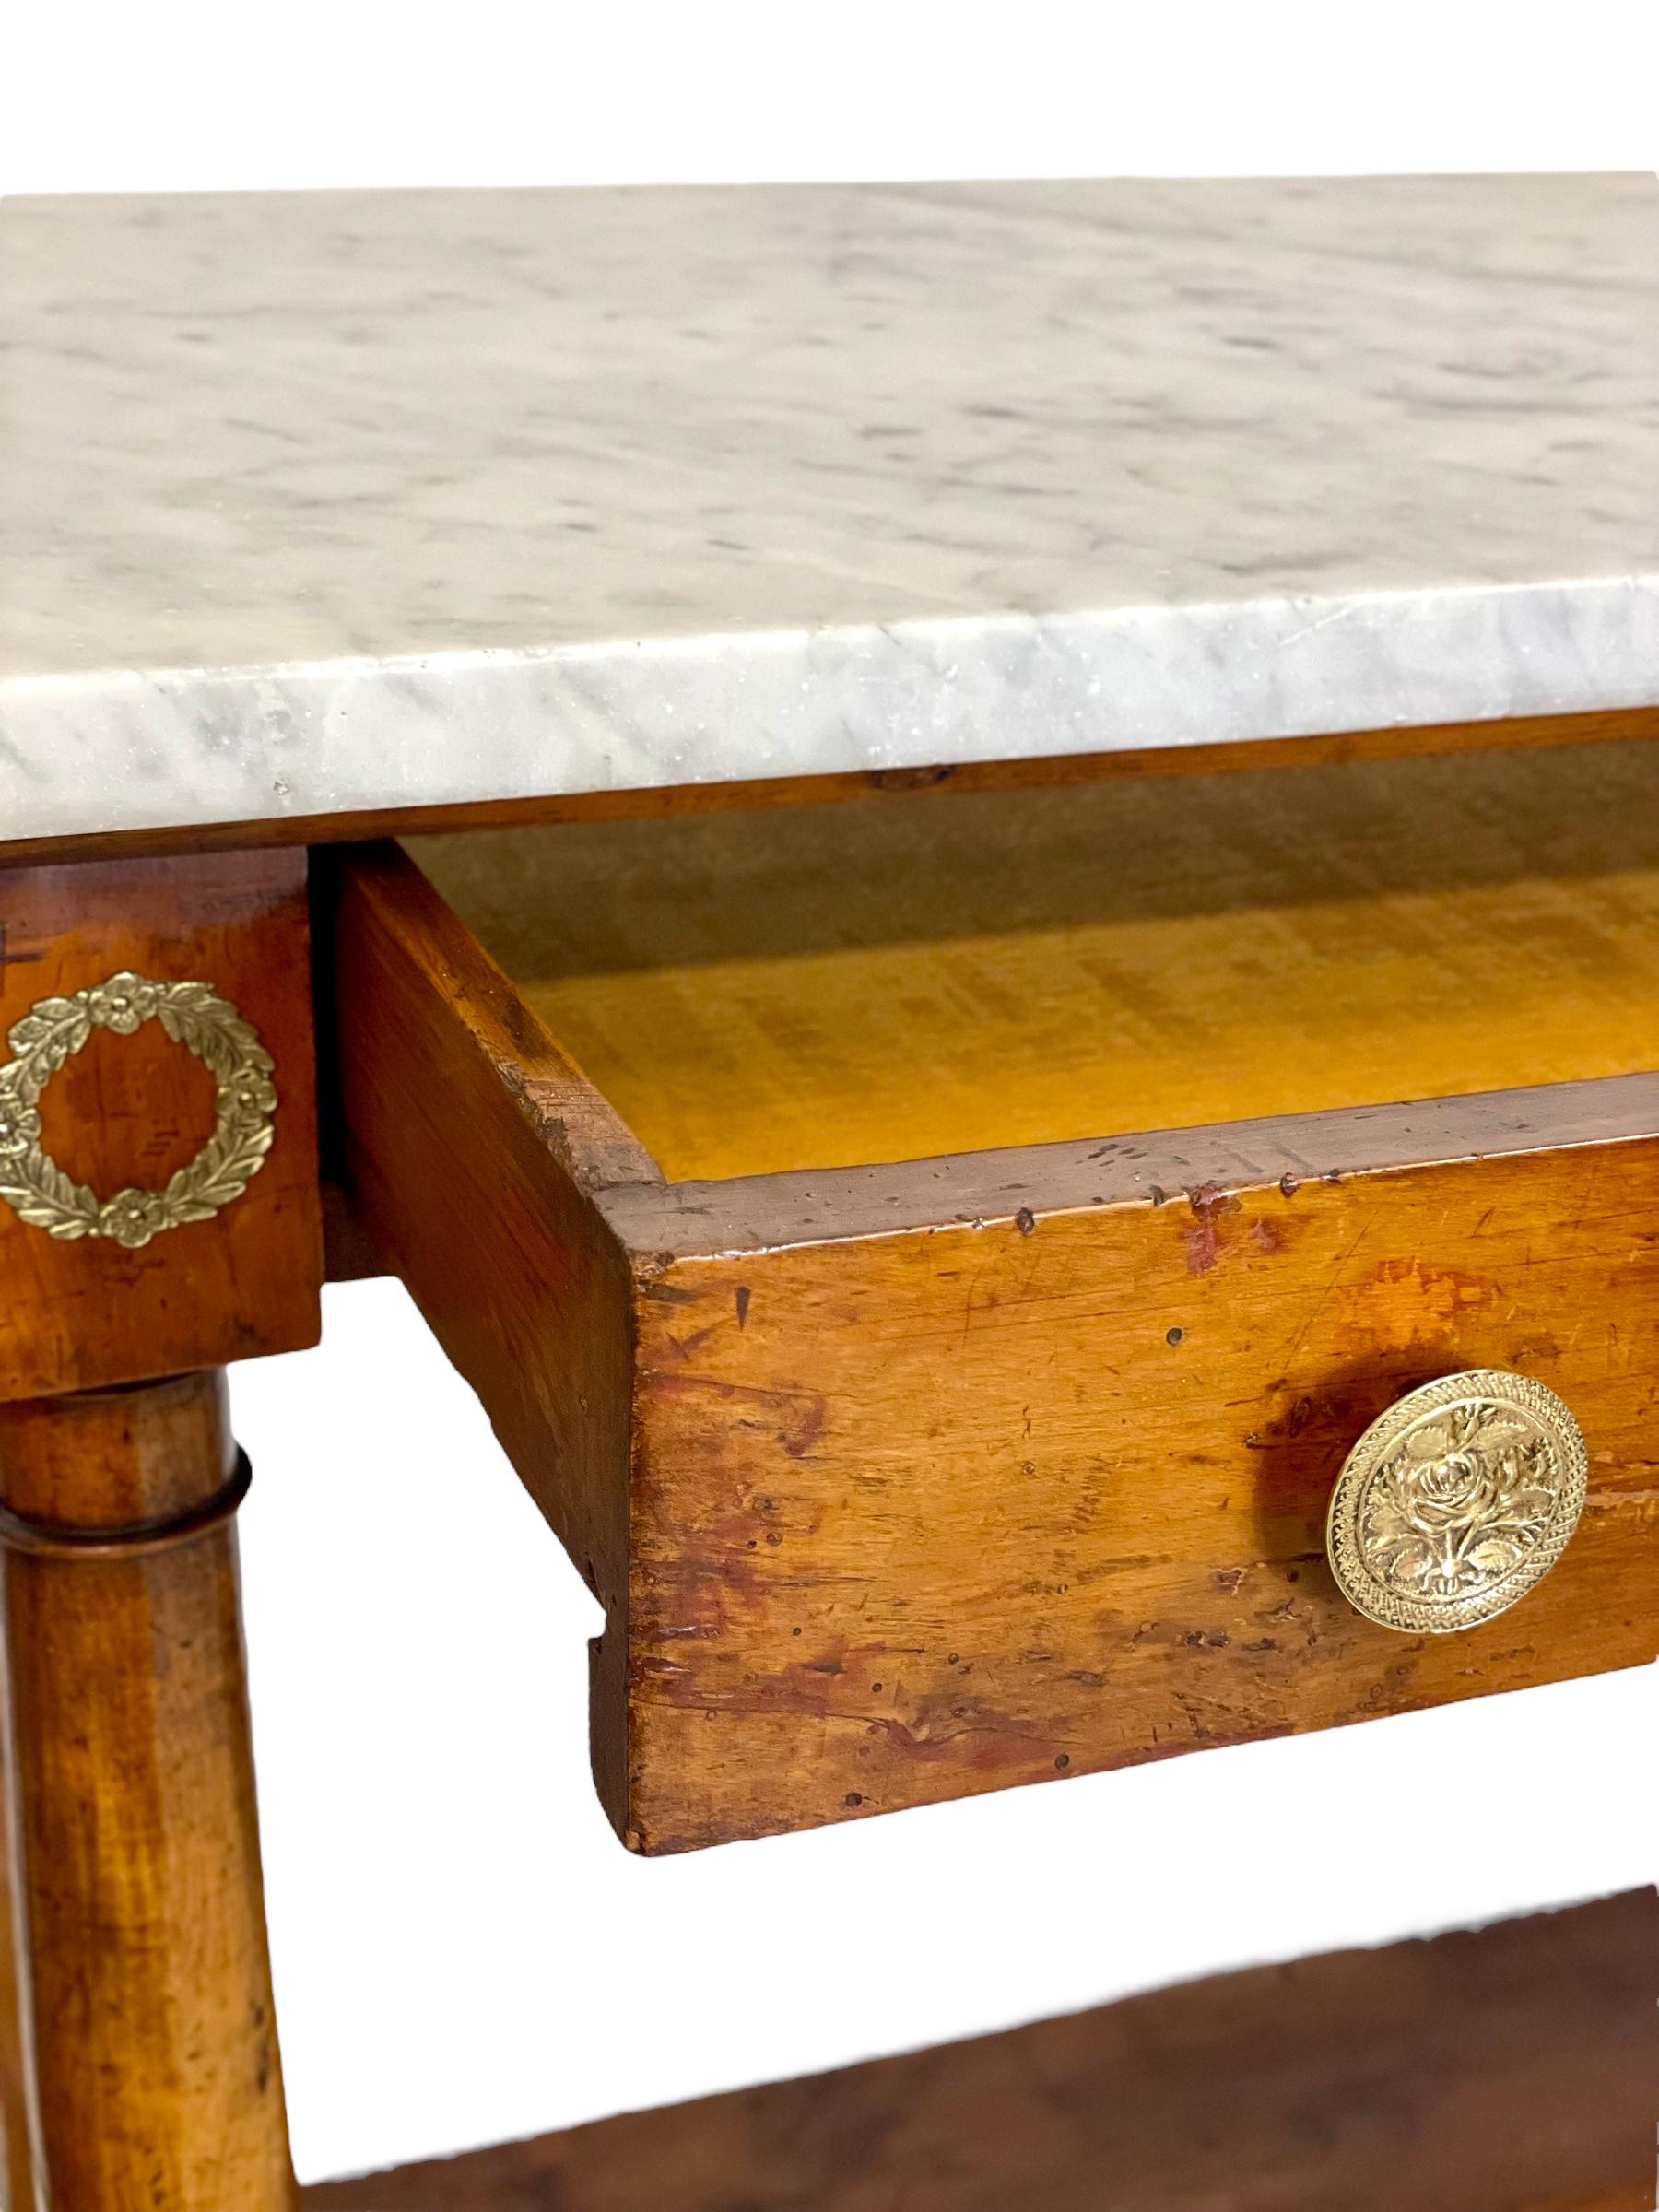 An imposing 1st Empire period console table of impressive proportions, featuring a veneered wood body and a grey veined marble top. The marble tray is set over one long frieze drawer, complete with ornate circular brass 'rosebud' drawer pulls, while